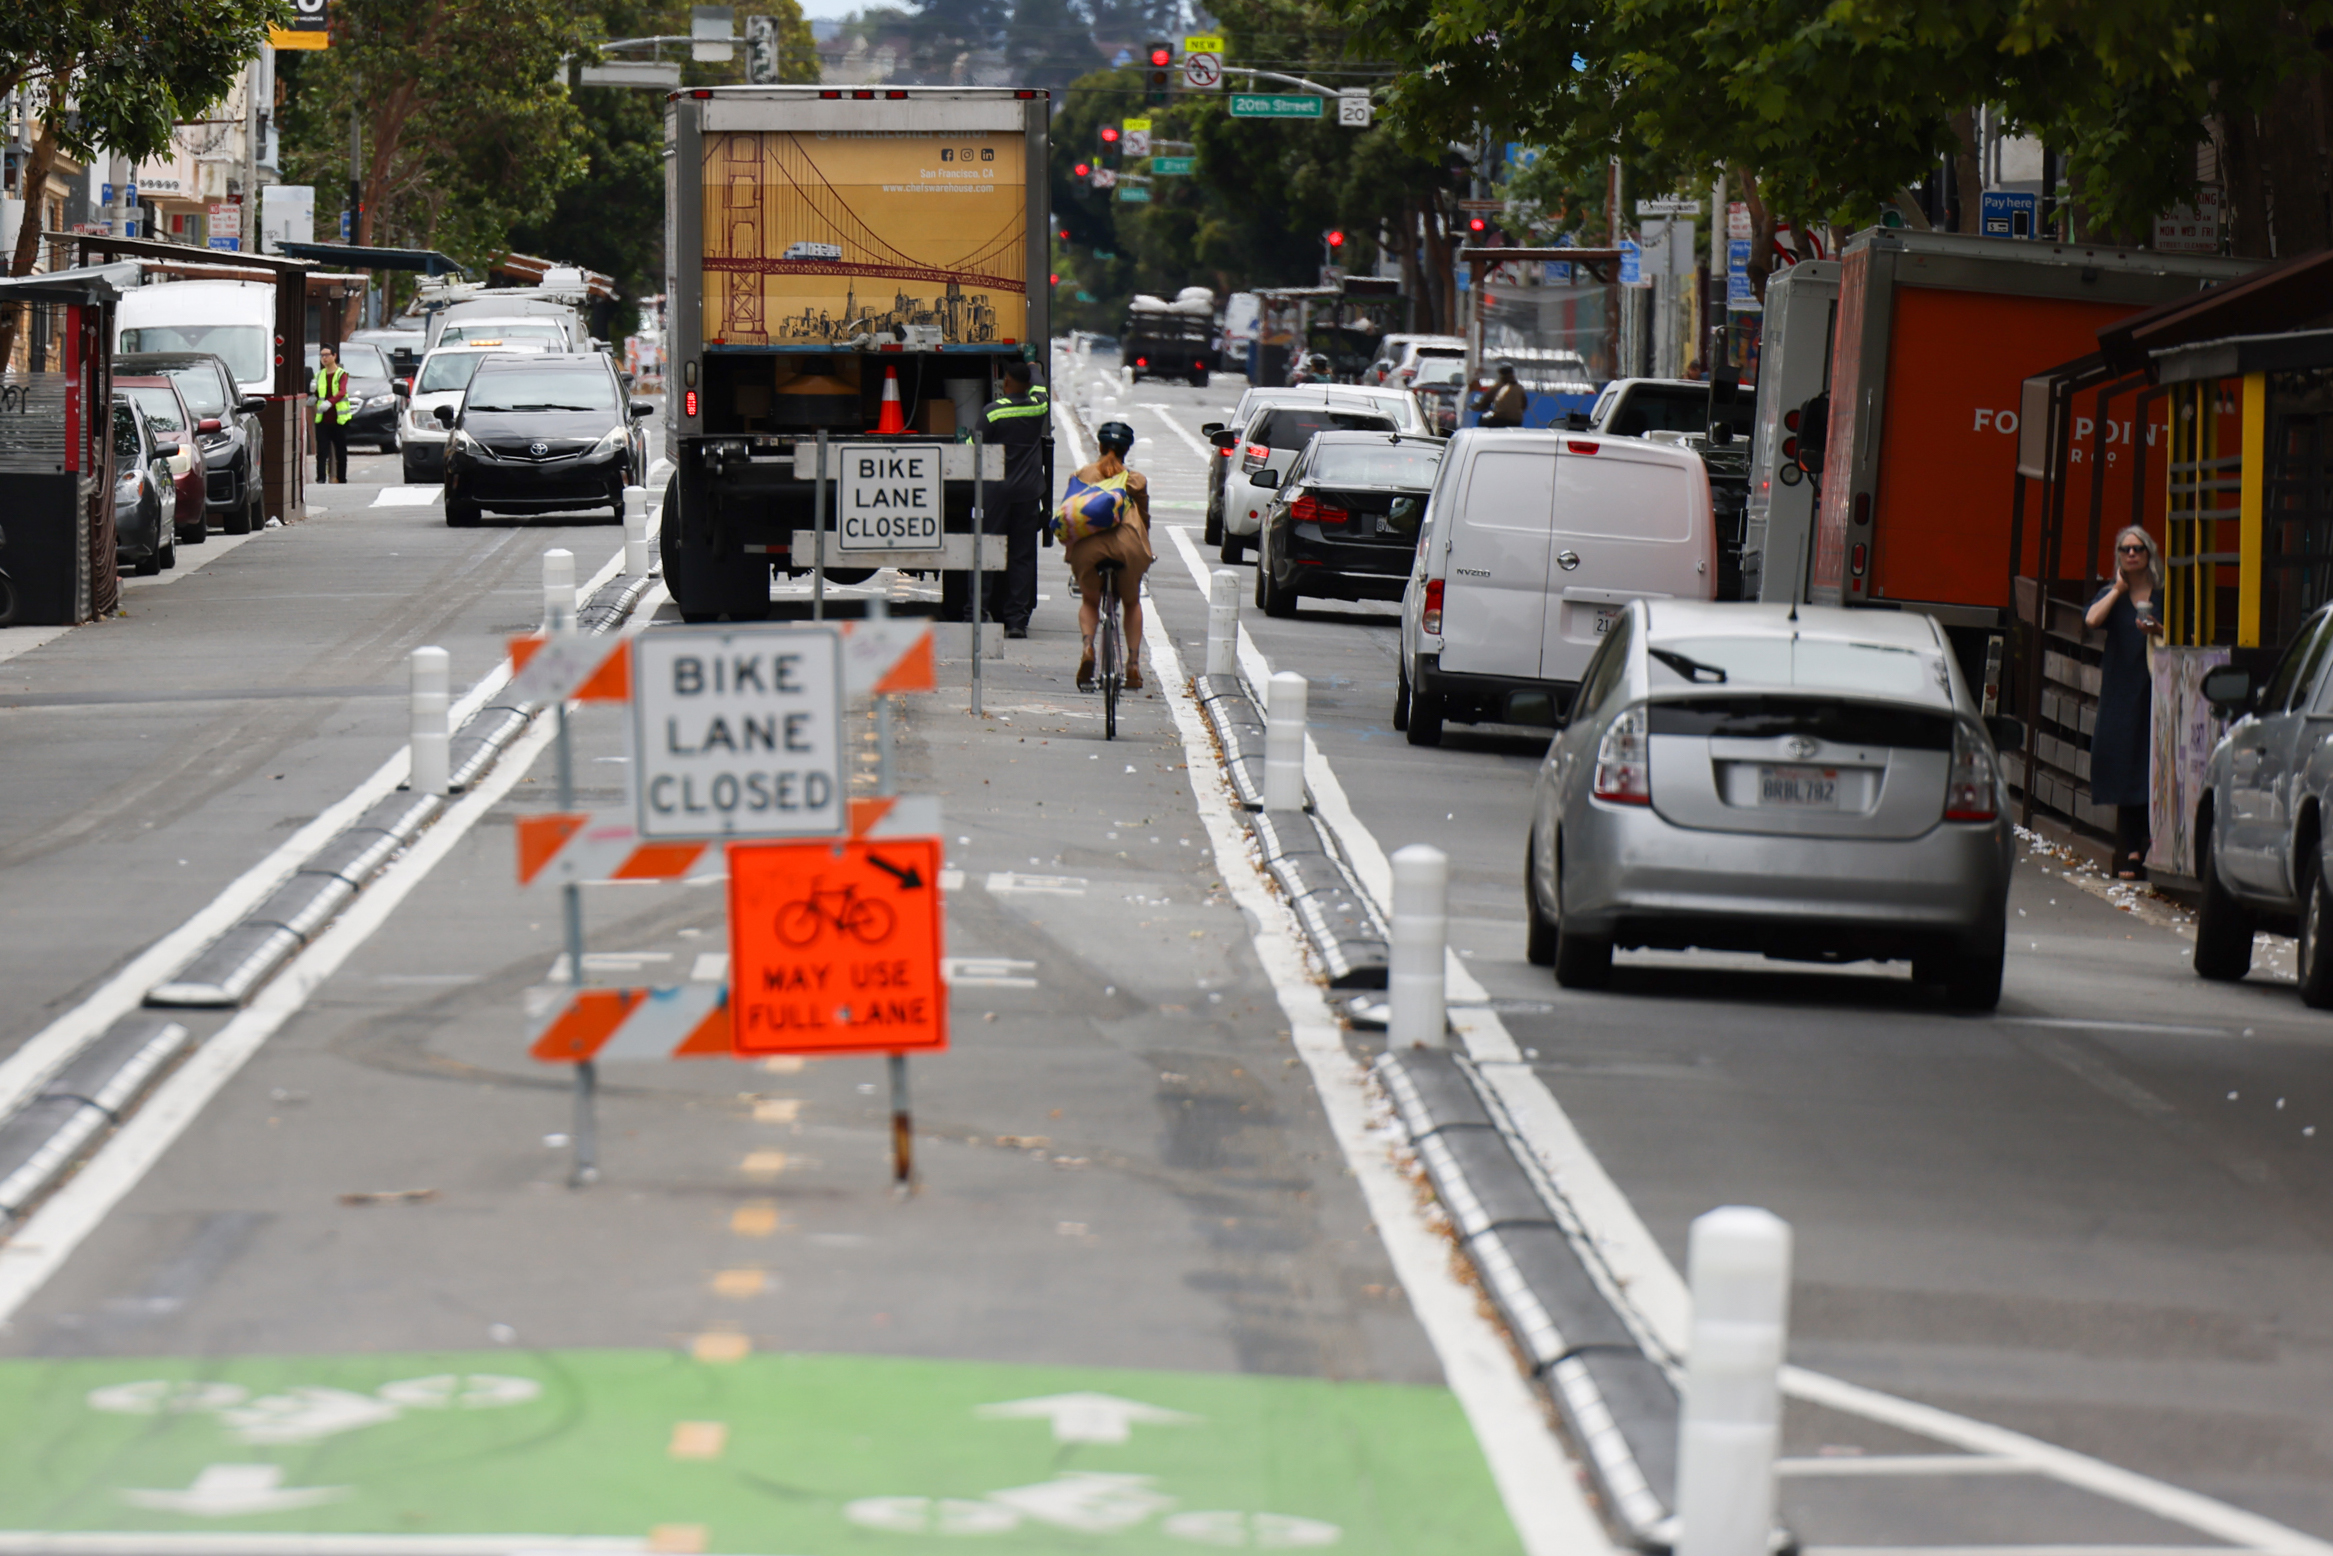 A caution sign warns cyclists in a yet-to-be-completed bike lane.